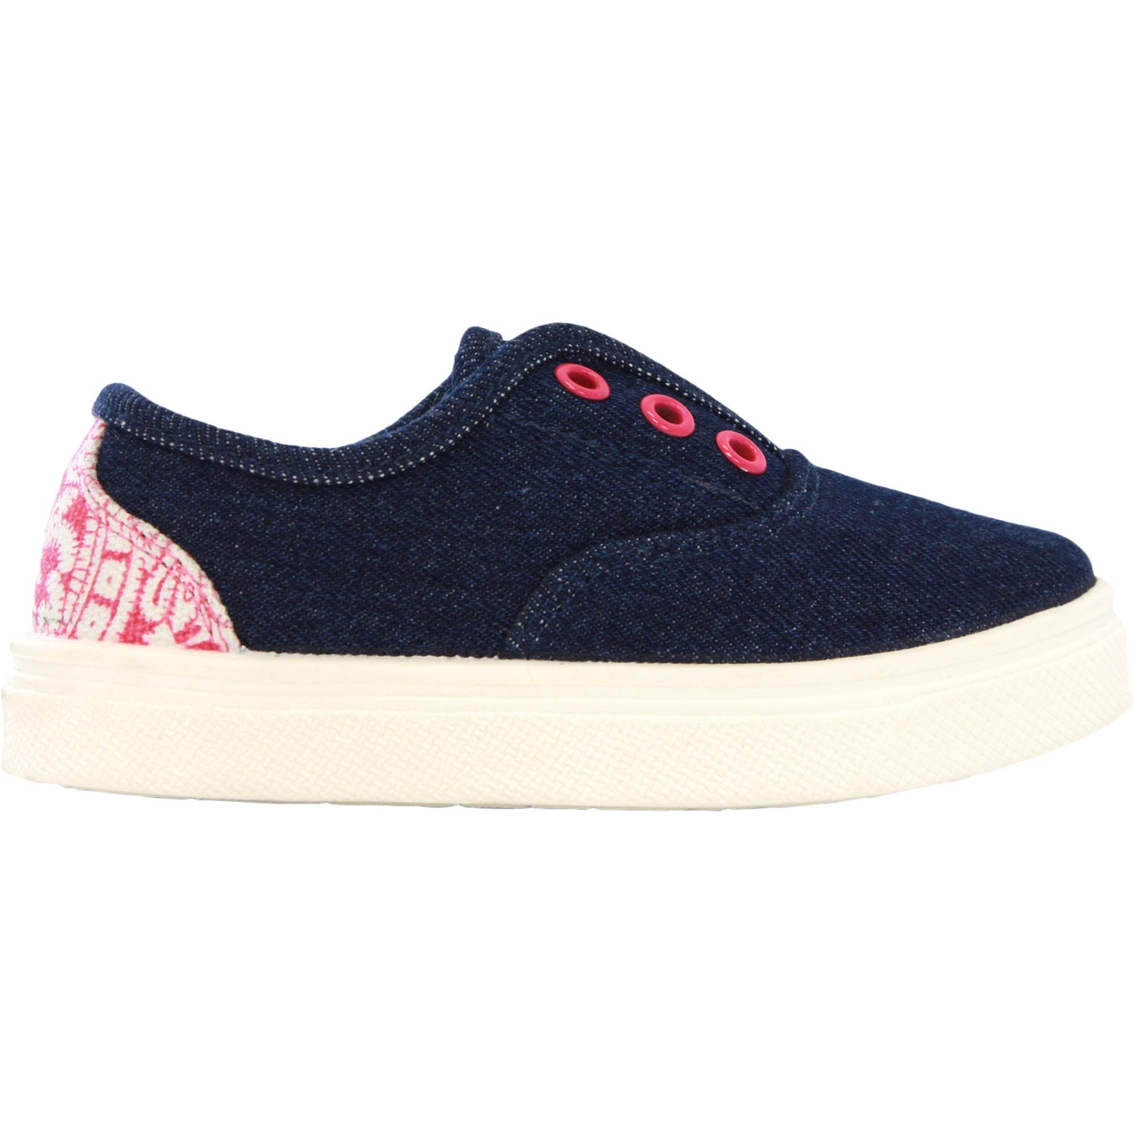 Oomphies Girls Robin Canvas Slip On Shoes | Children's Athletic Shoes ...